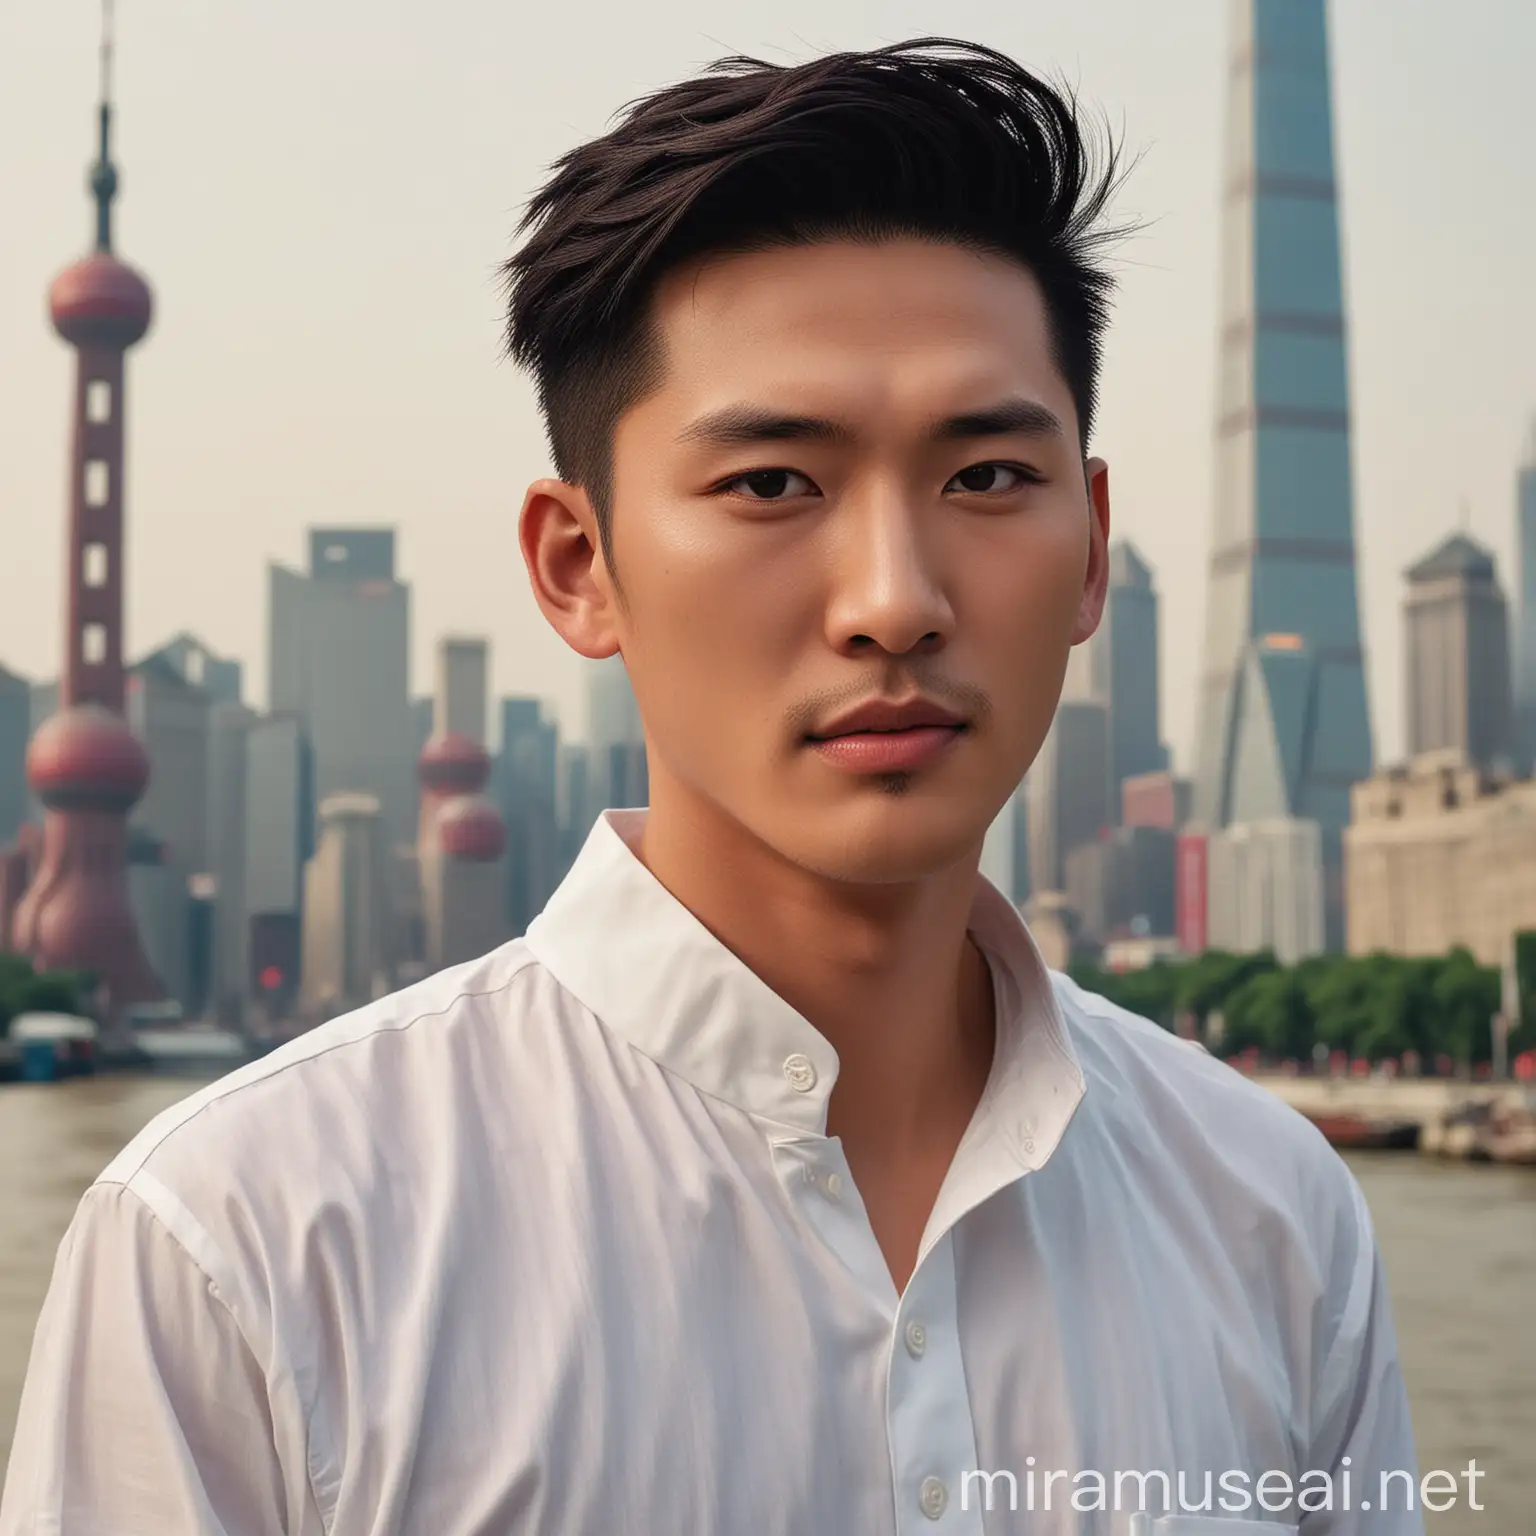 Sophisticated YouTuber in Shanghai Hu Ge Lookalike with Iconic Bund Cityscape